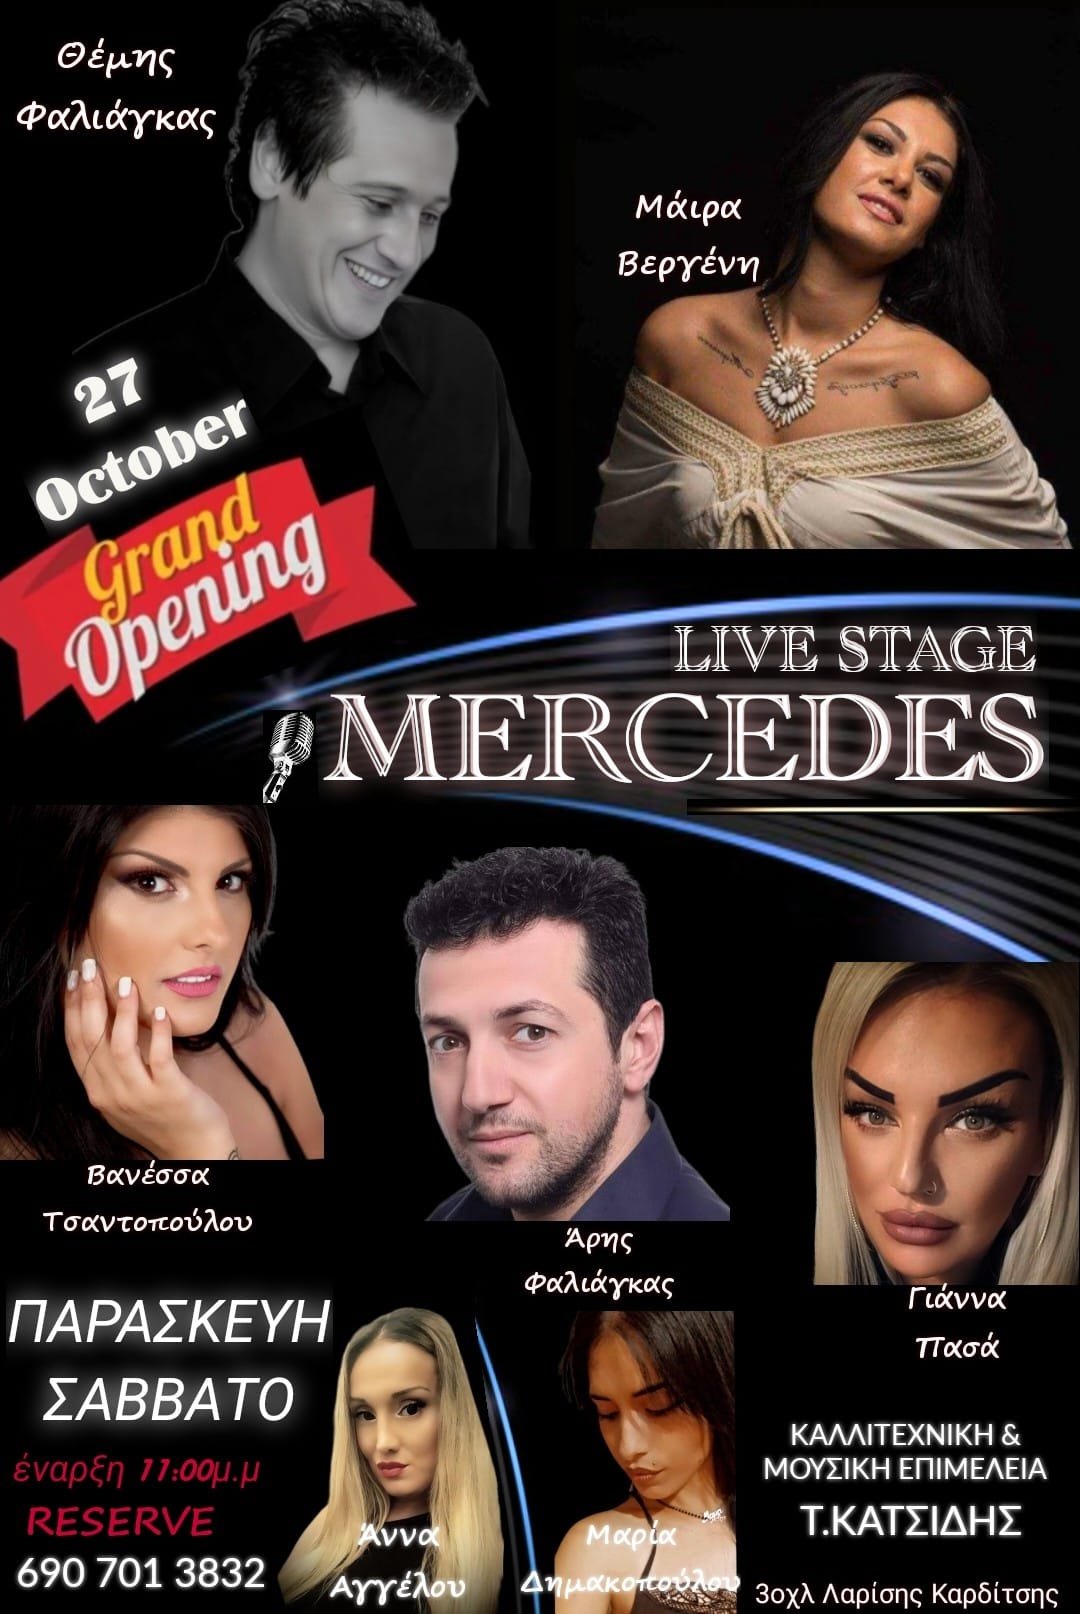 MERCEDES live stage